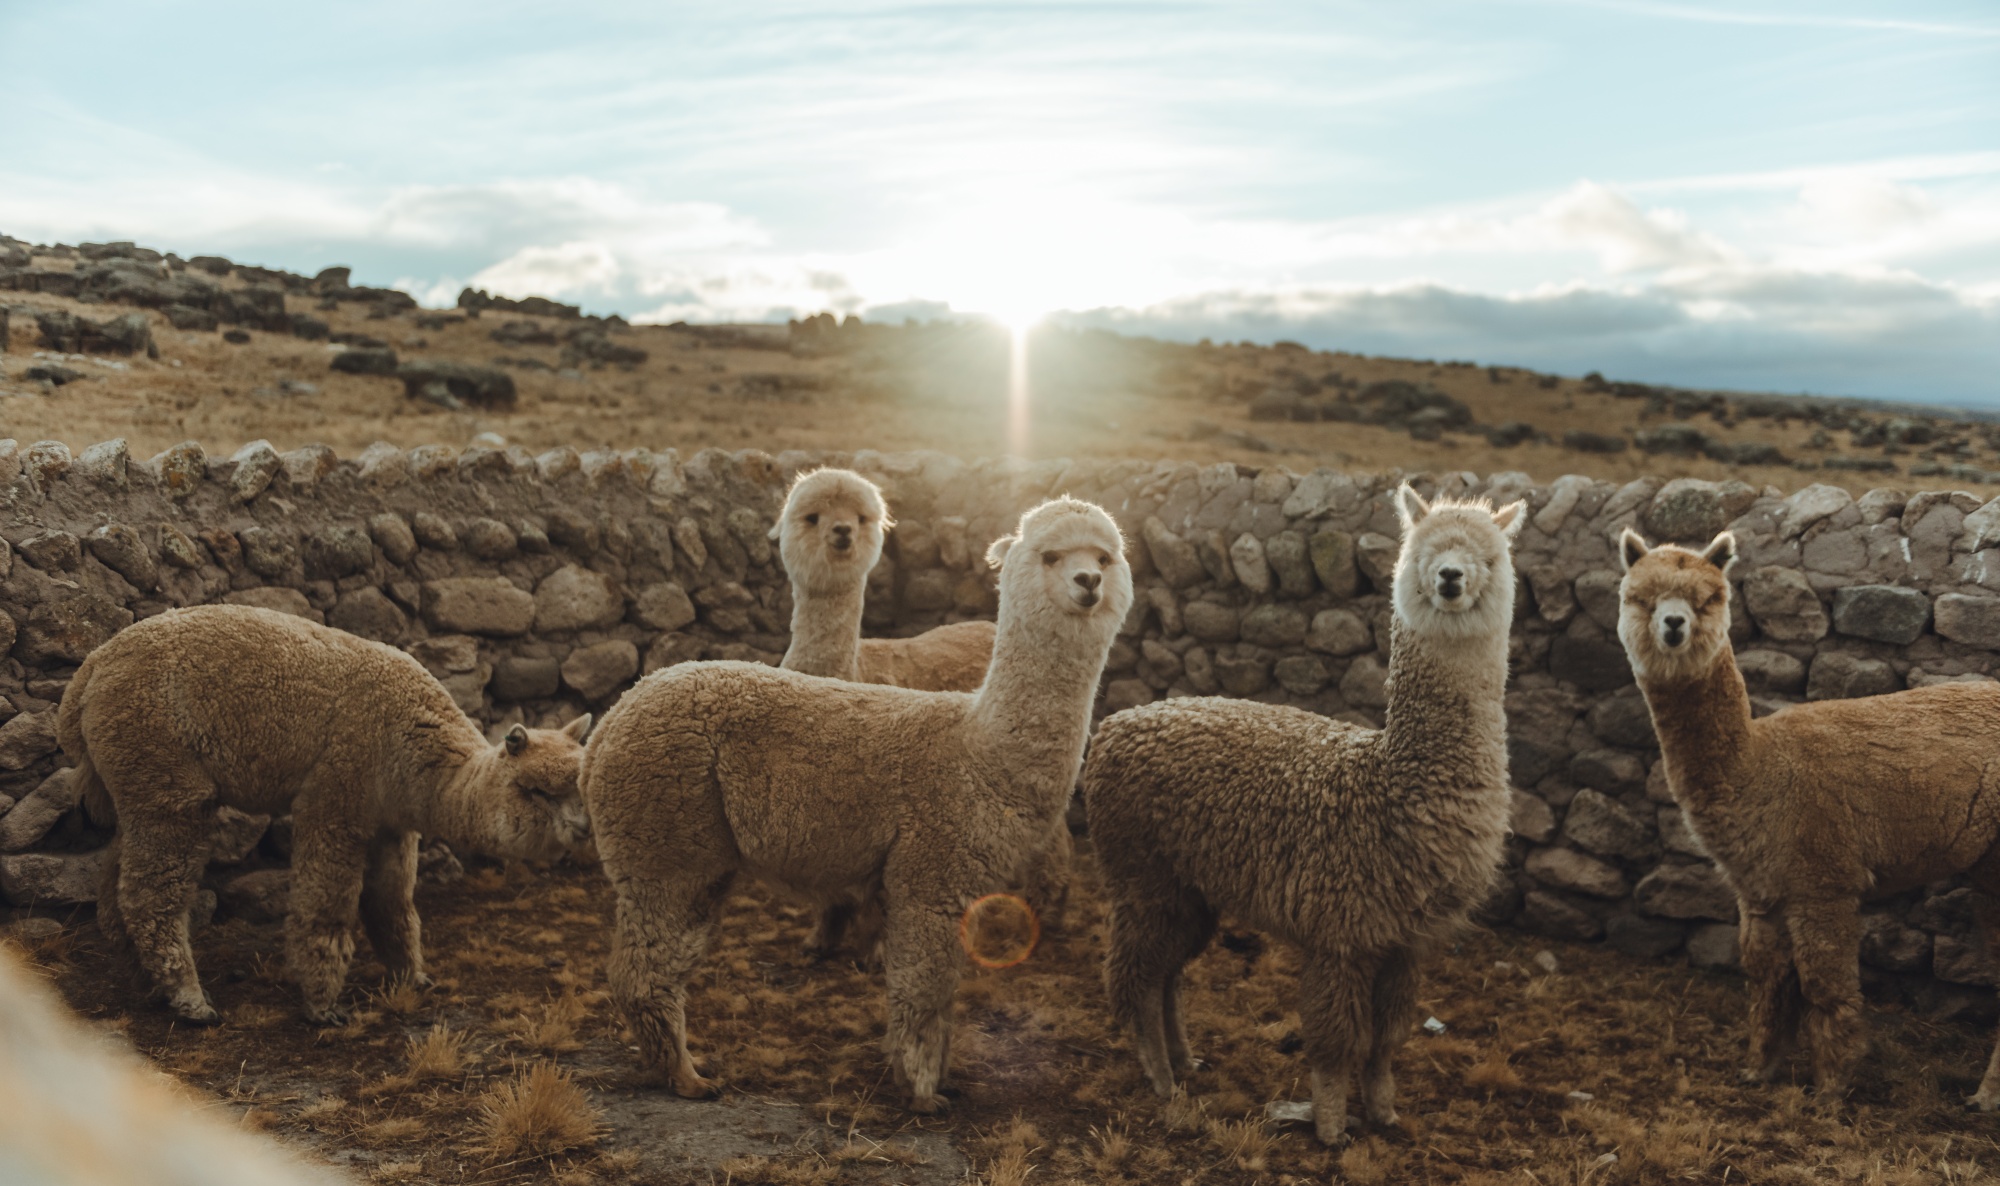 When sheared, alpacas&nbsp;produce different ranges of fiber; the roughest parts are spun into carpets and rugs, the softest into socks and baby clothes.